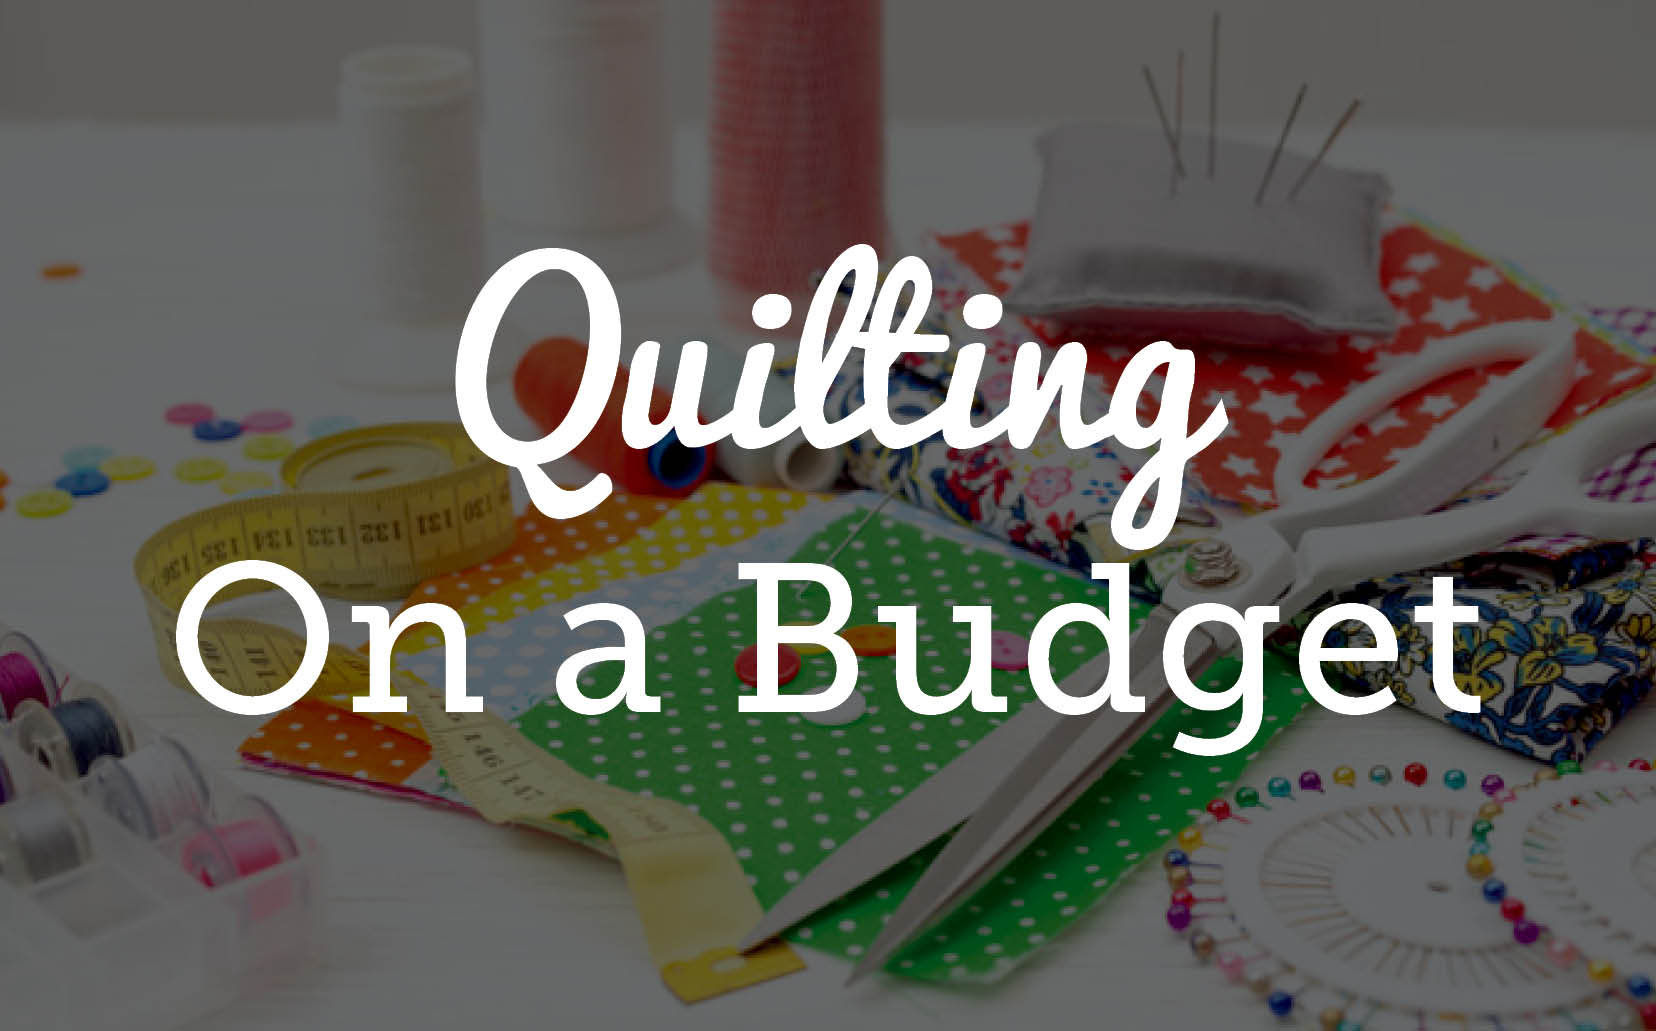 Quilting on a budget text